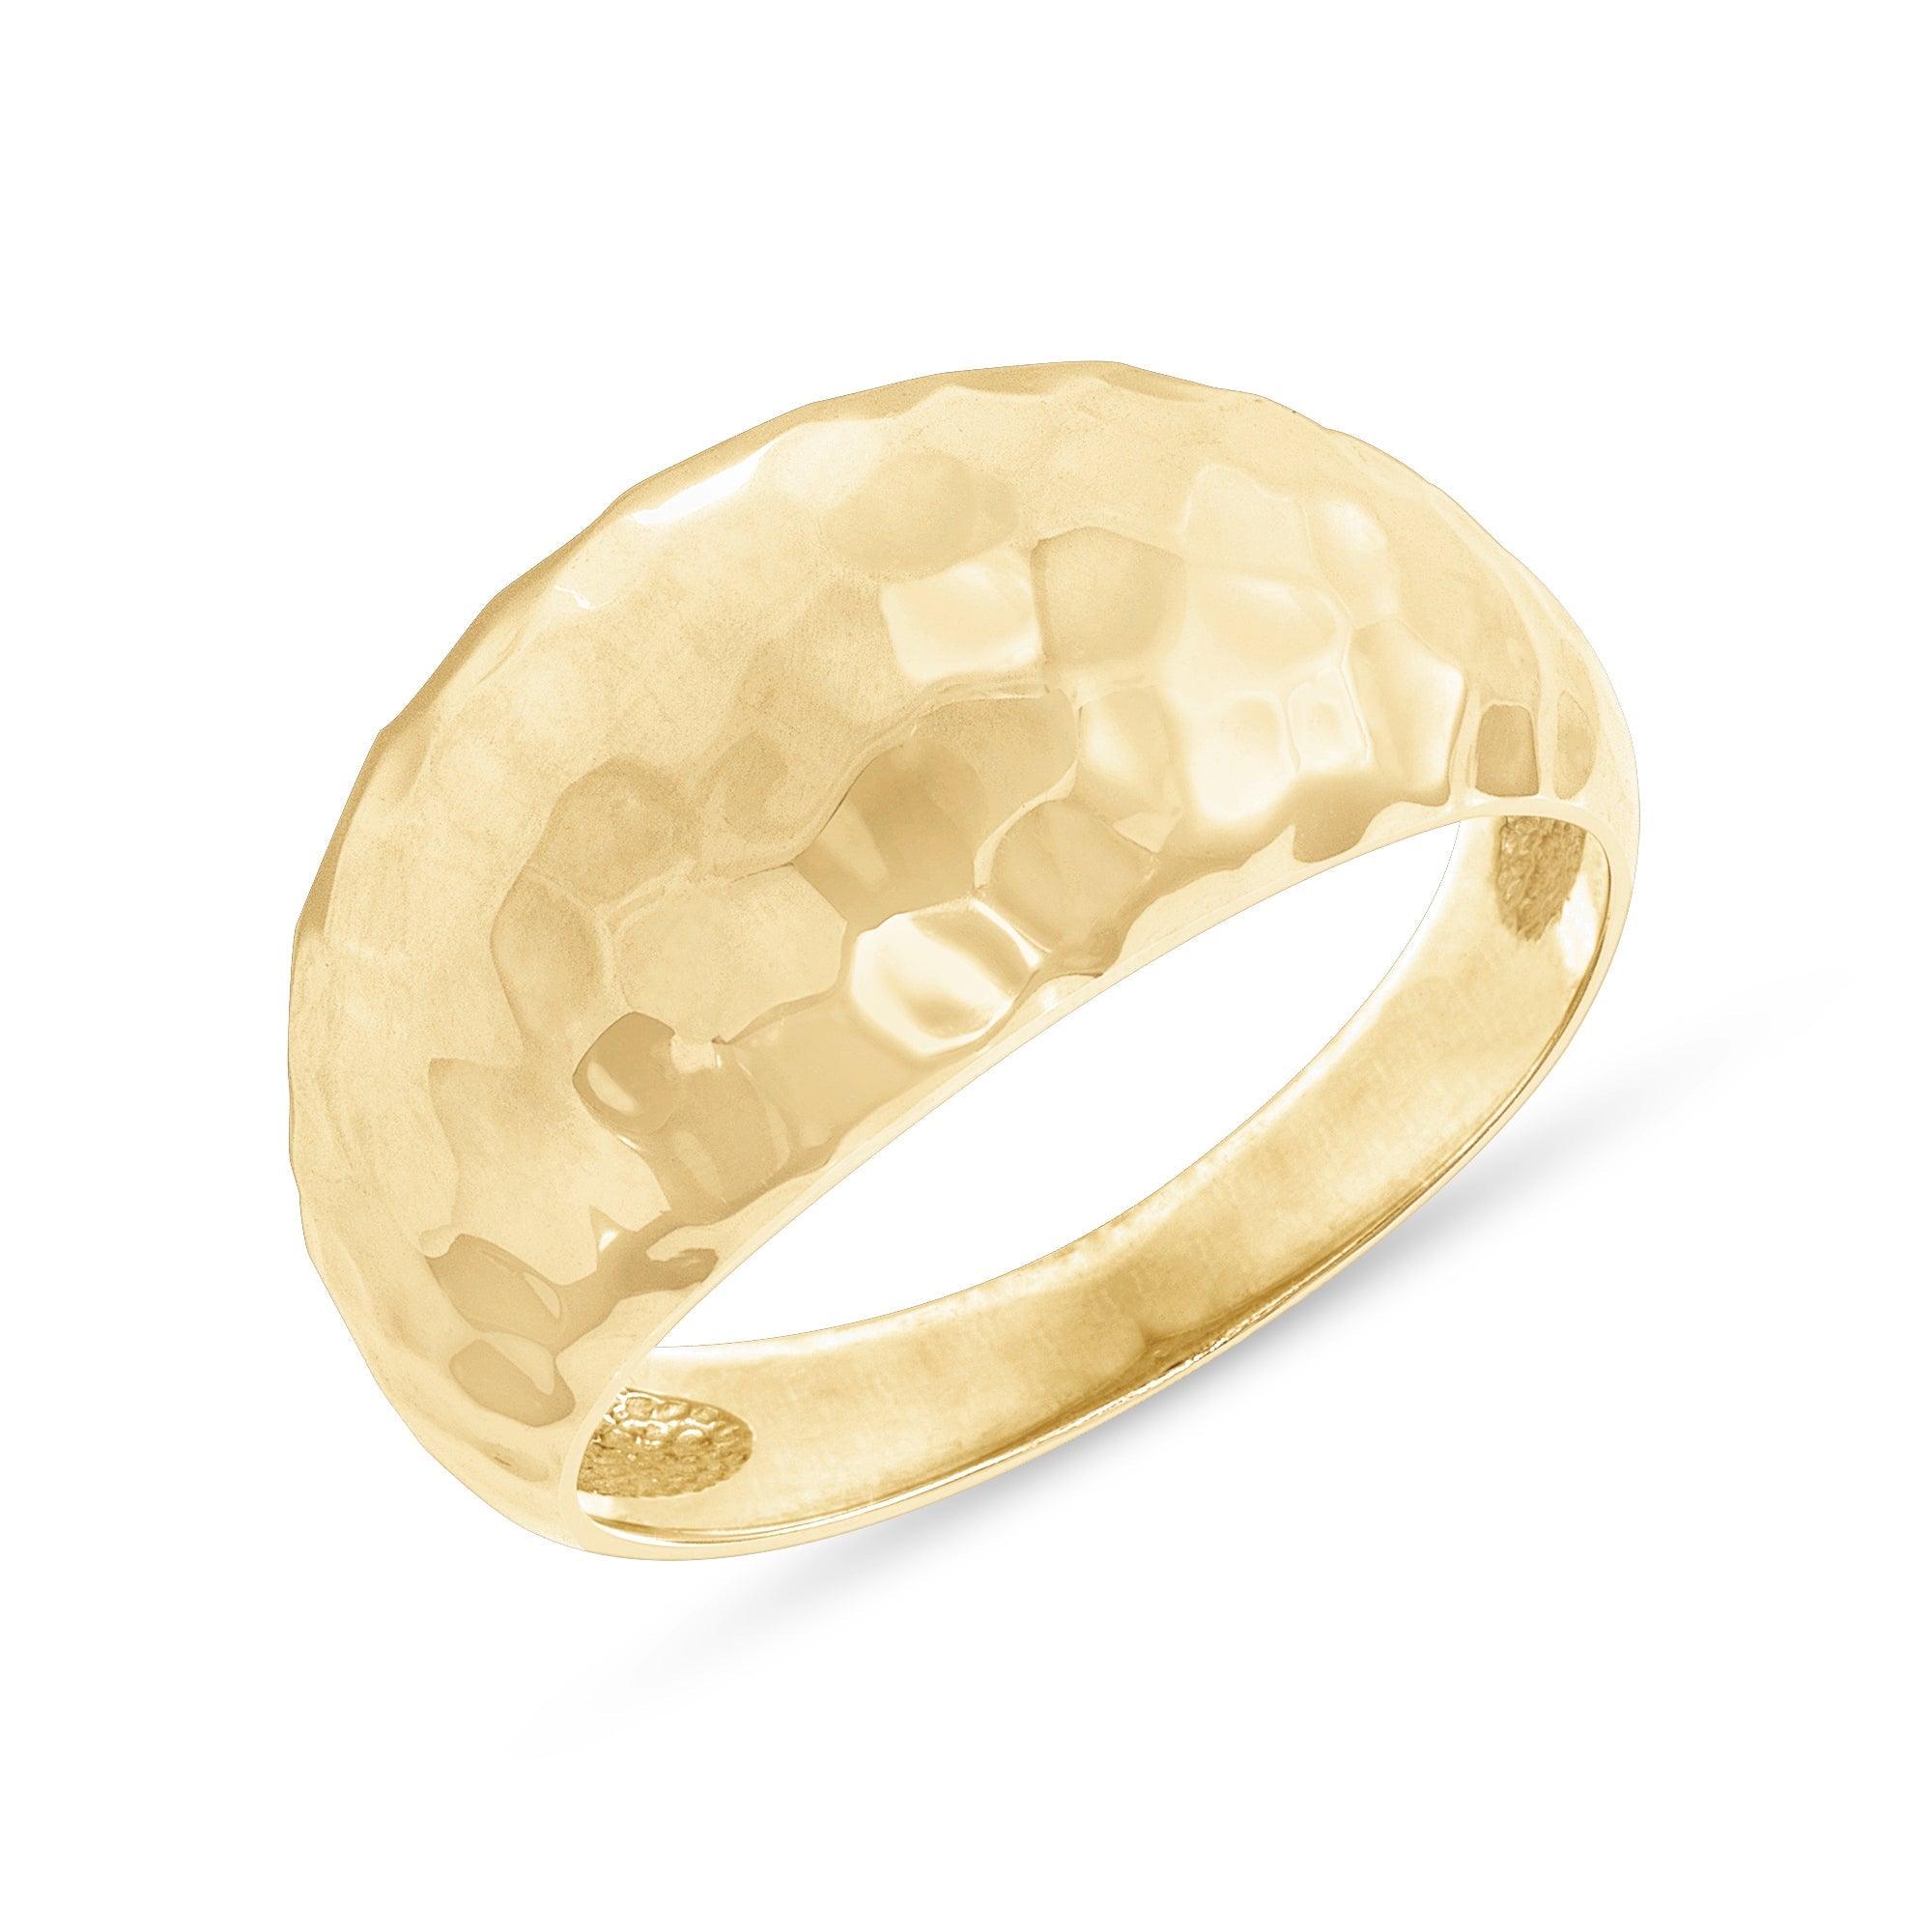 Dome Chunky Gold Nugget Ring for Everyday and Evening Wear from Rafi's Jewelry